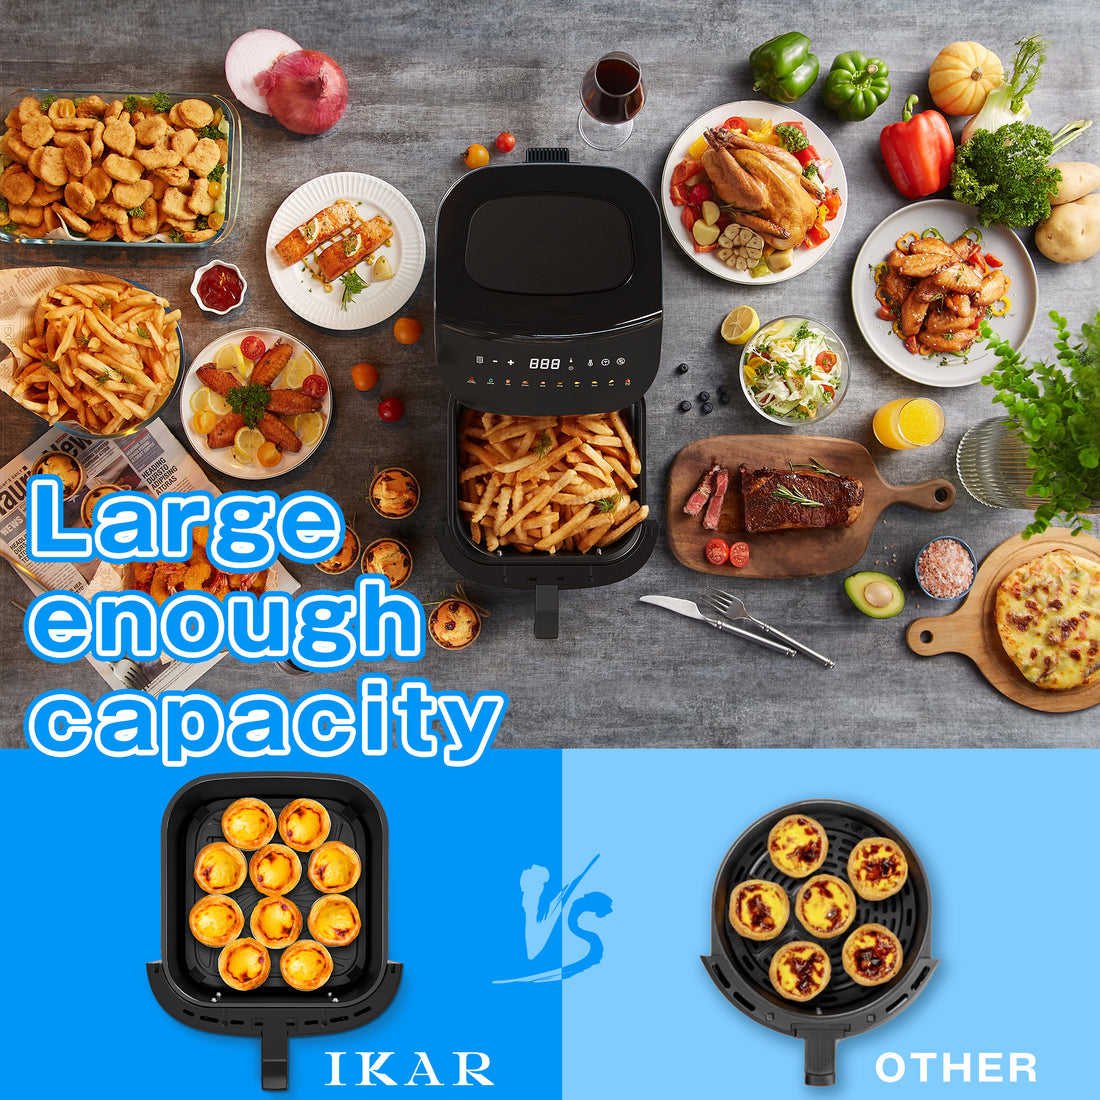 Air Fryer 7.0L 1600W 10-in-1 Functions, Air Fry, Roast, Bake, Broil, Dehydrate, Digital Touchscreen Air Fryers, Nonstick &amp; Dishwasher-Safe Basket, Stainless Steel Air Fryer Oven